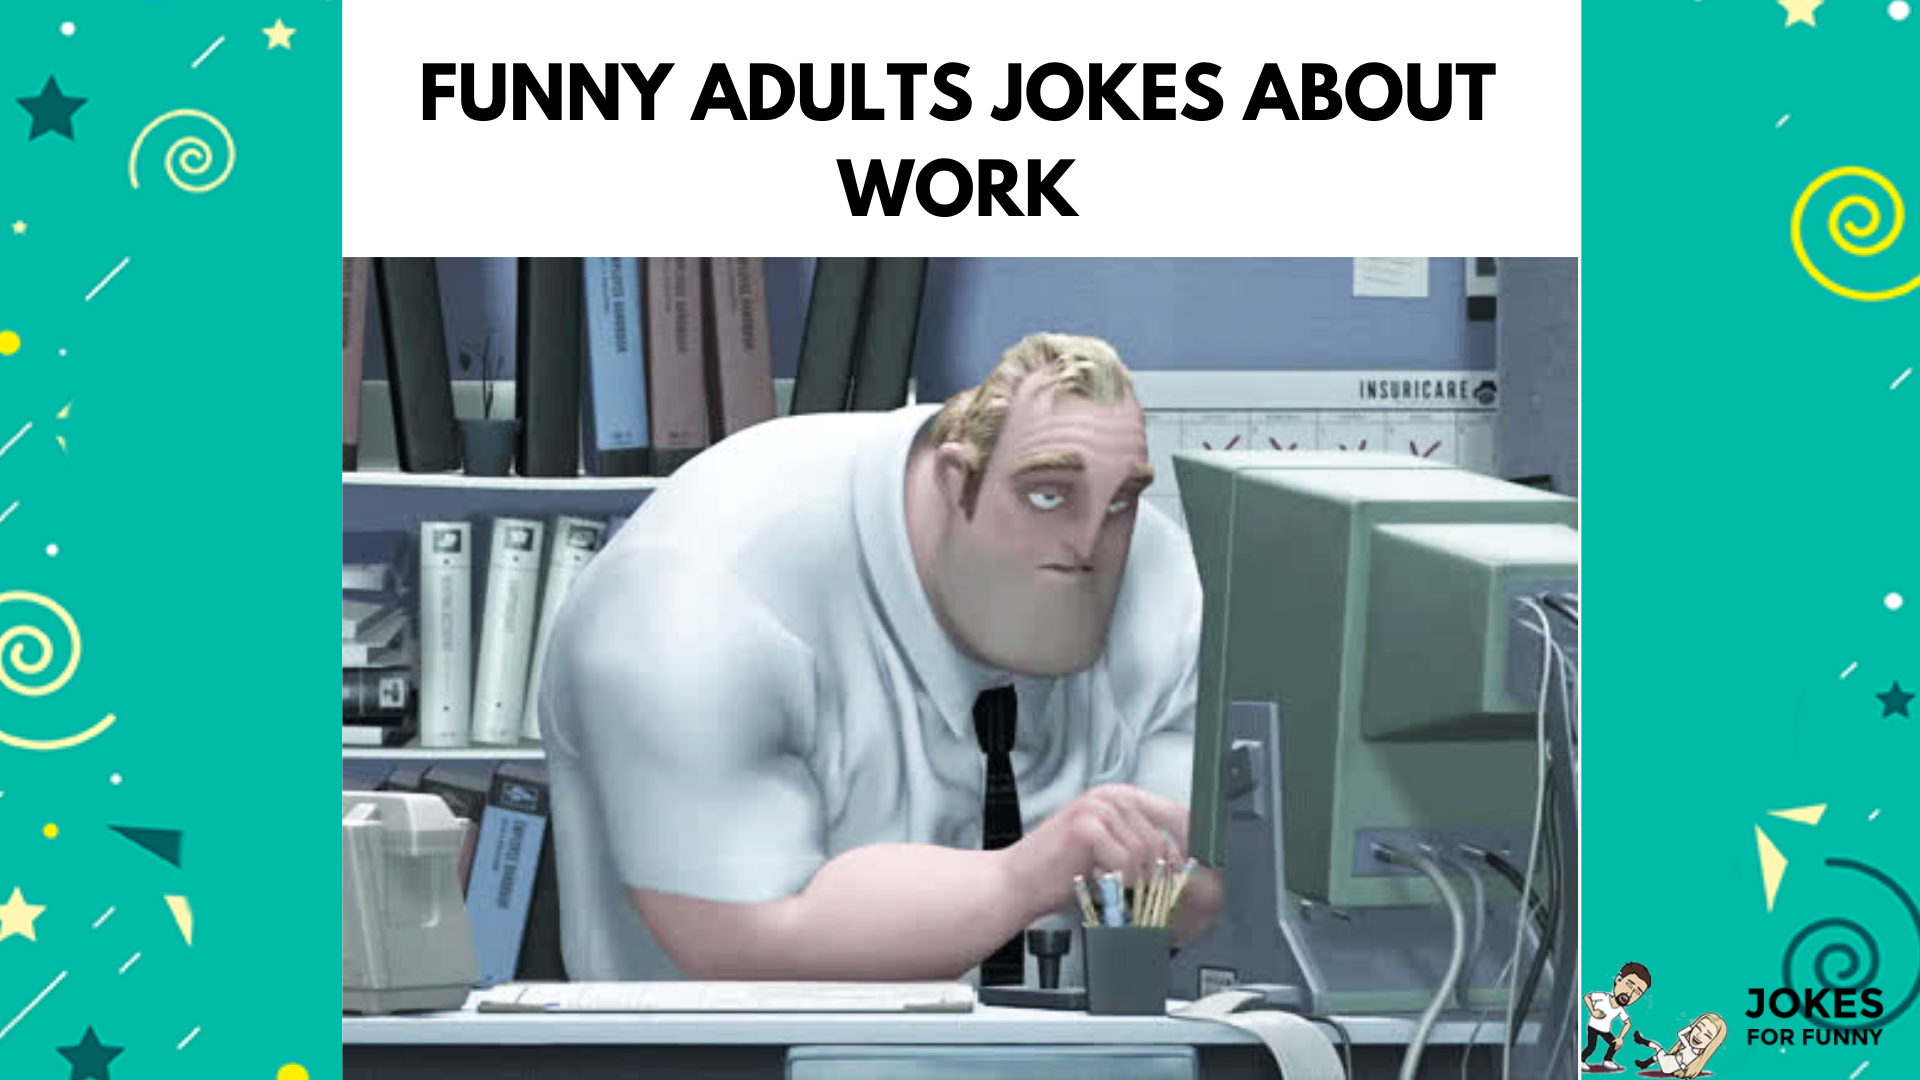 Funny Adult Jokes About Work - Jokes for funny